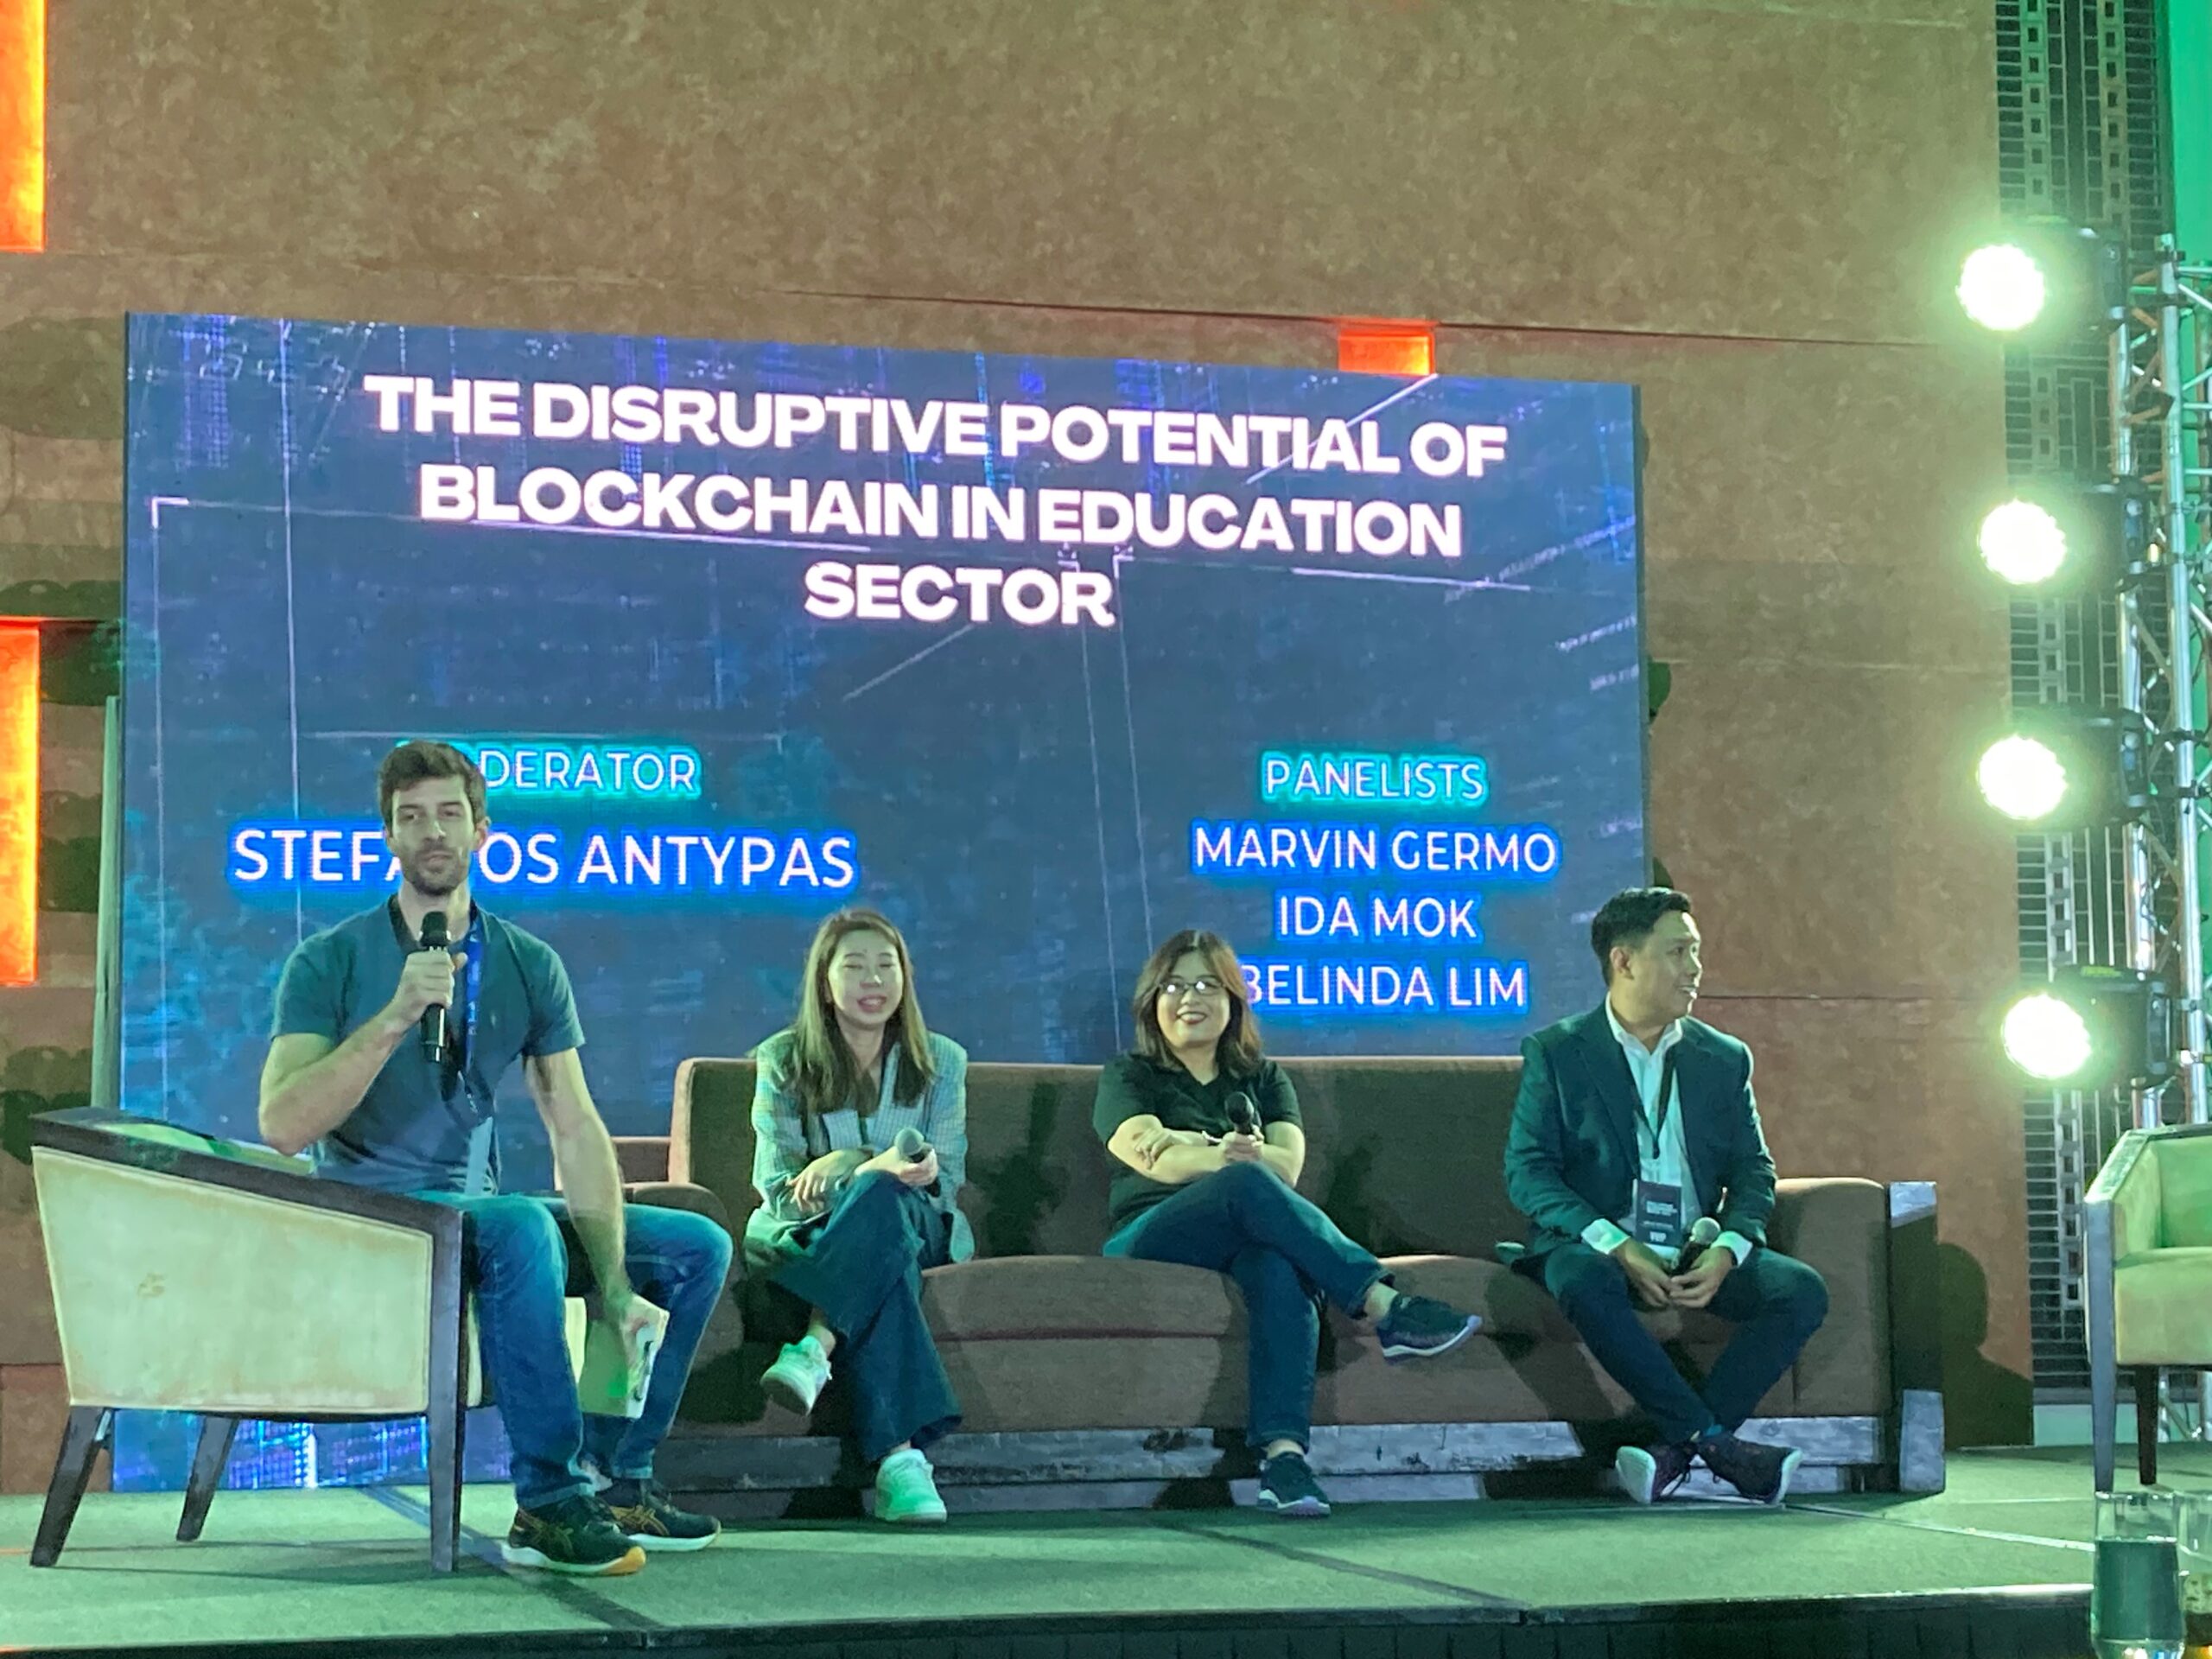 “The Disruptive Potential of Blockchain in Education Sector” with moderator Stefanos Antypas